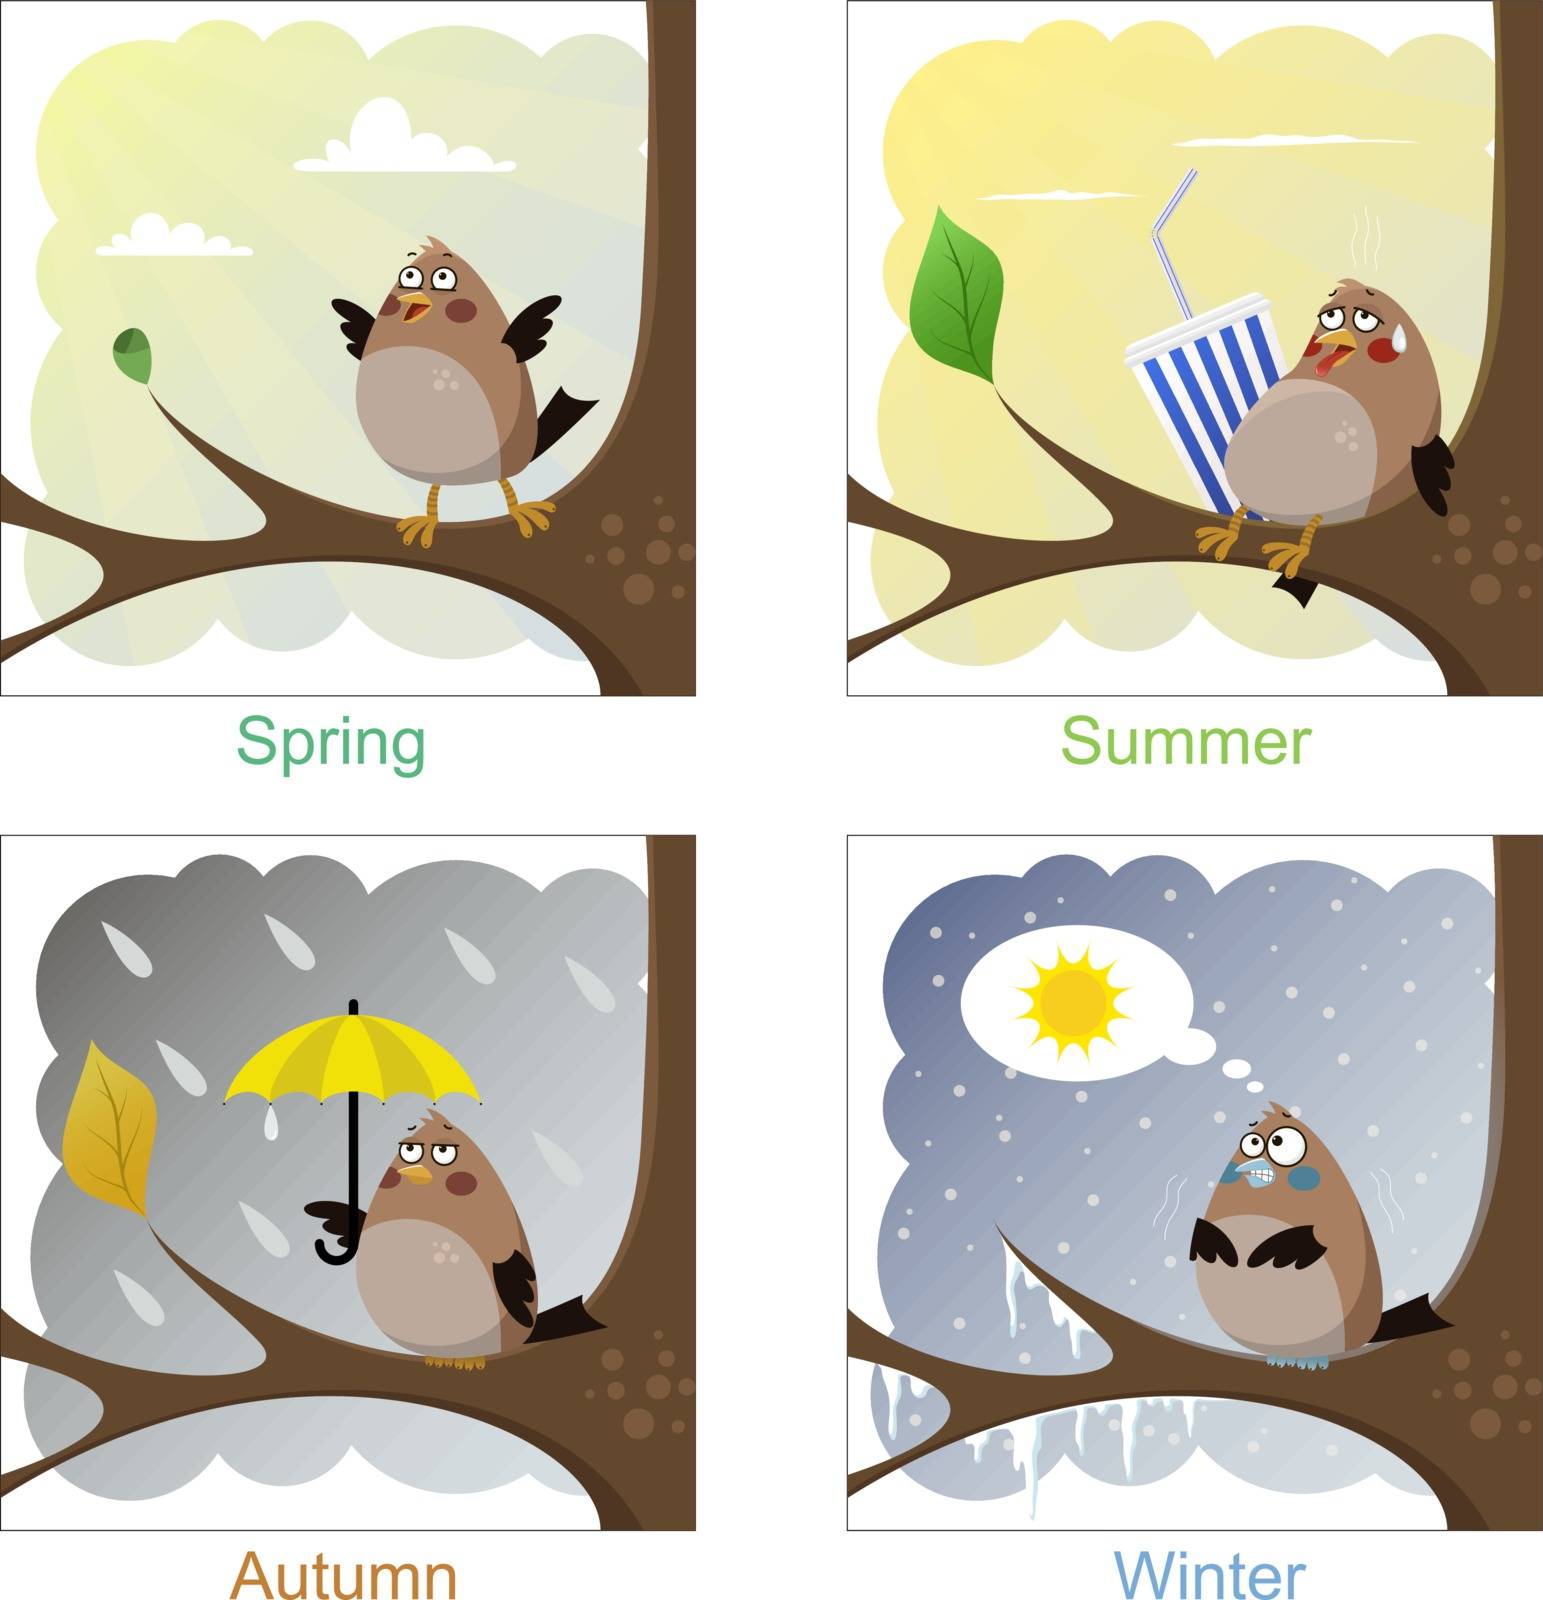 Funny sparrow in every season of the year